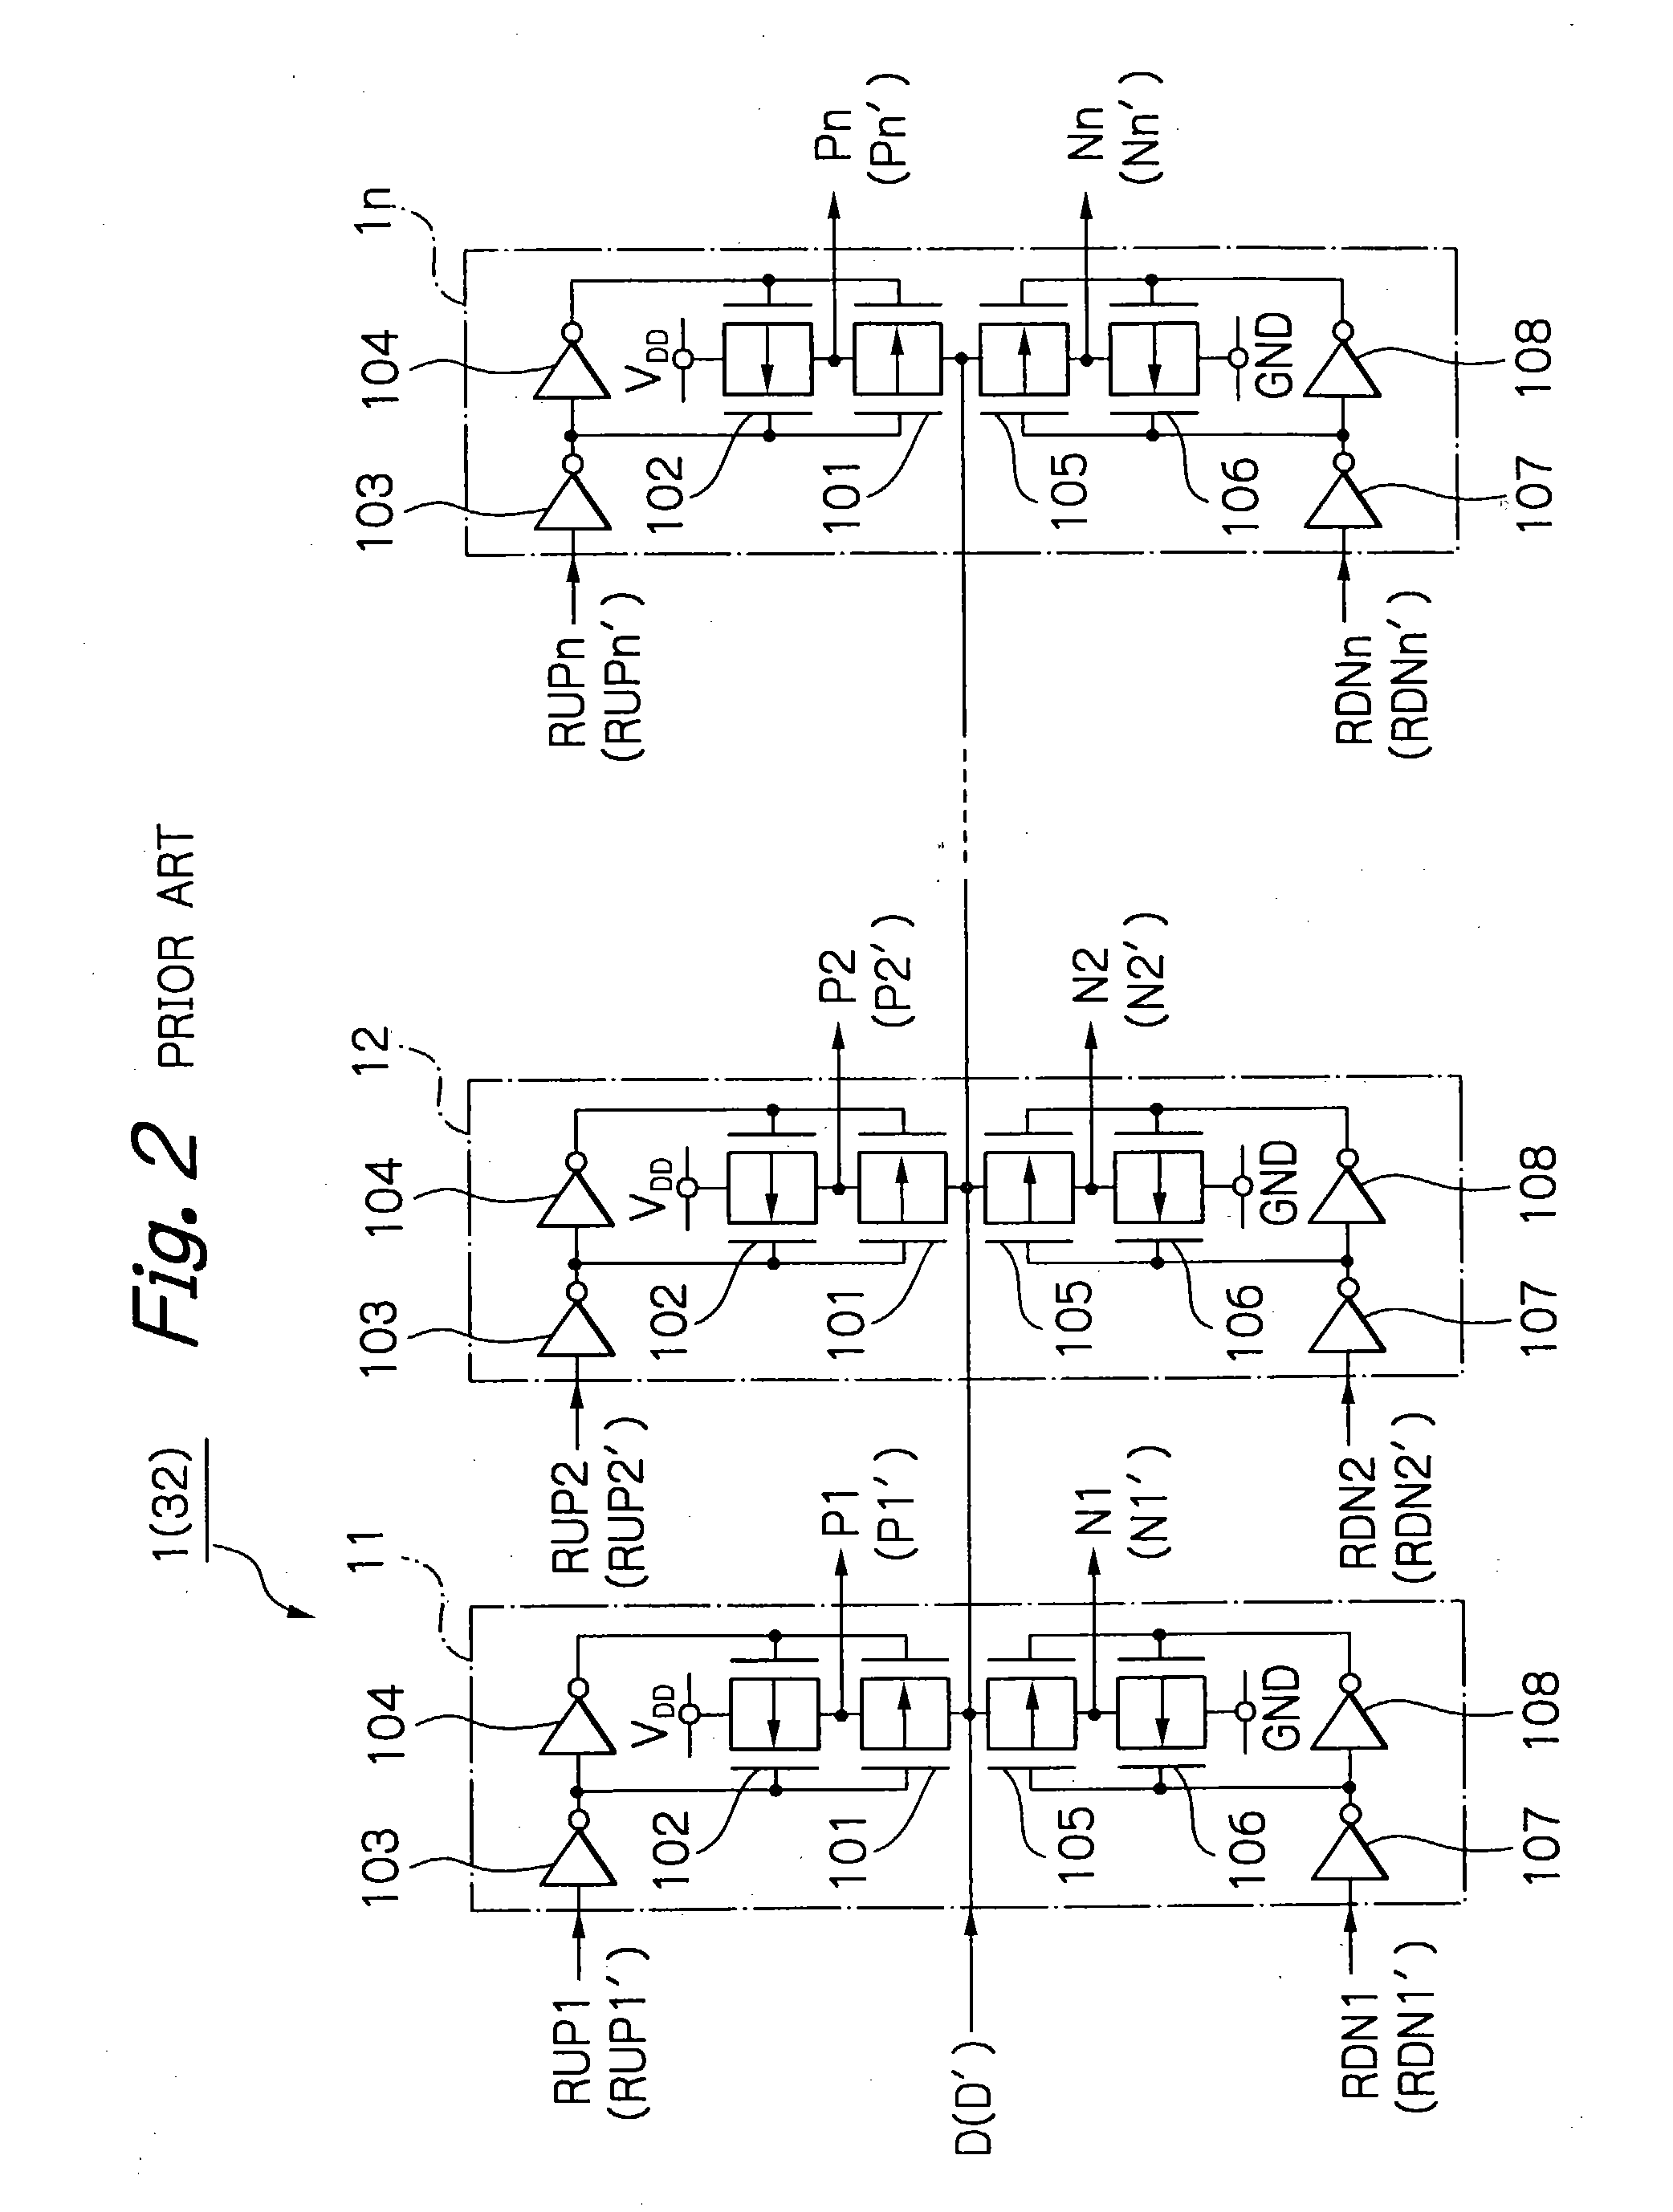 Output buffer apparatus capable of adjusting output impedance in synchronization with data signal